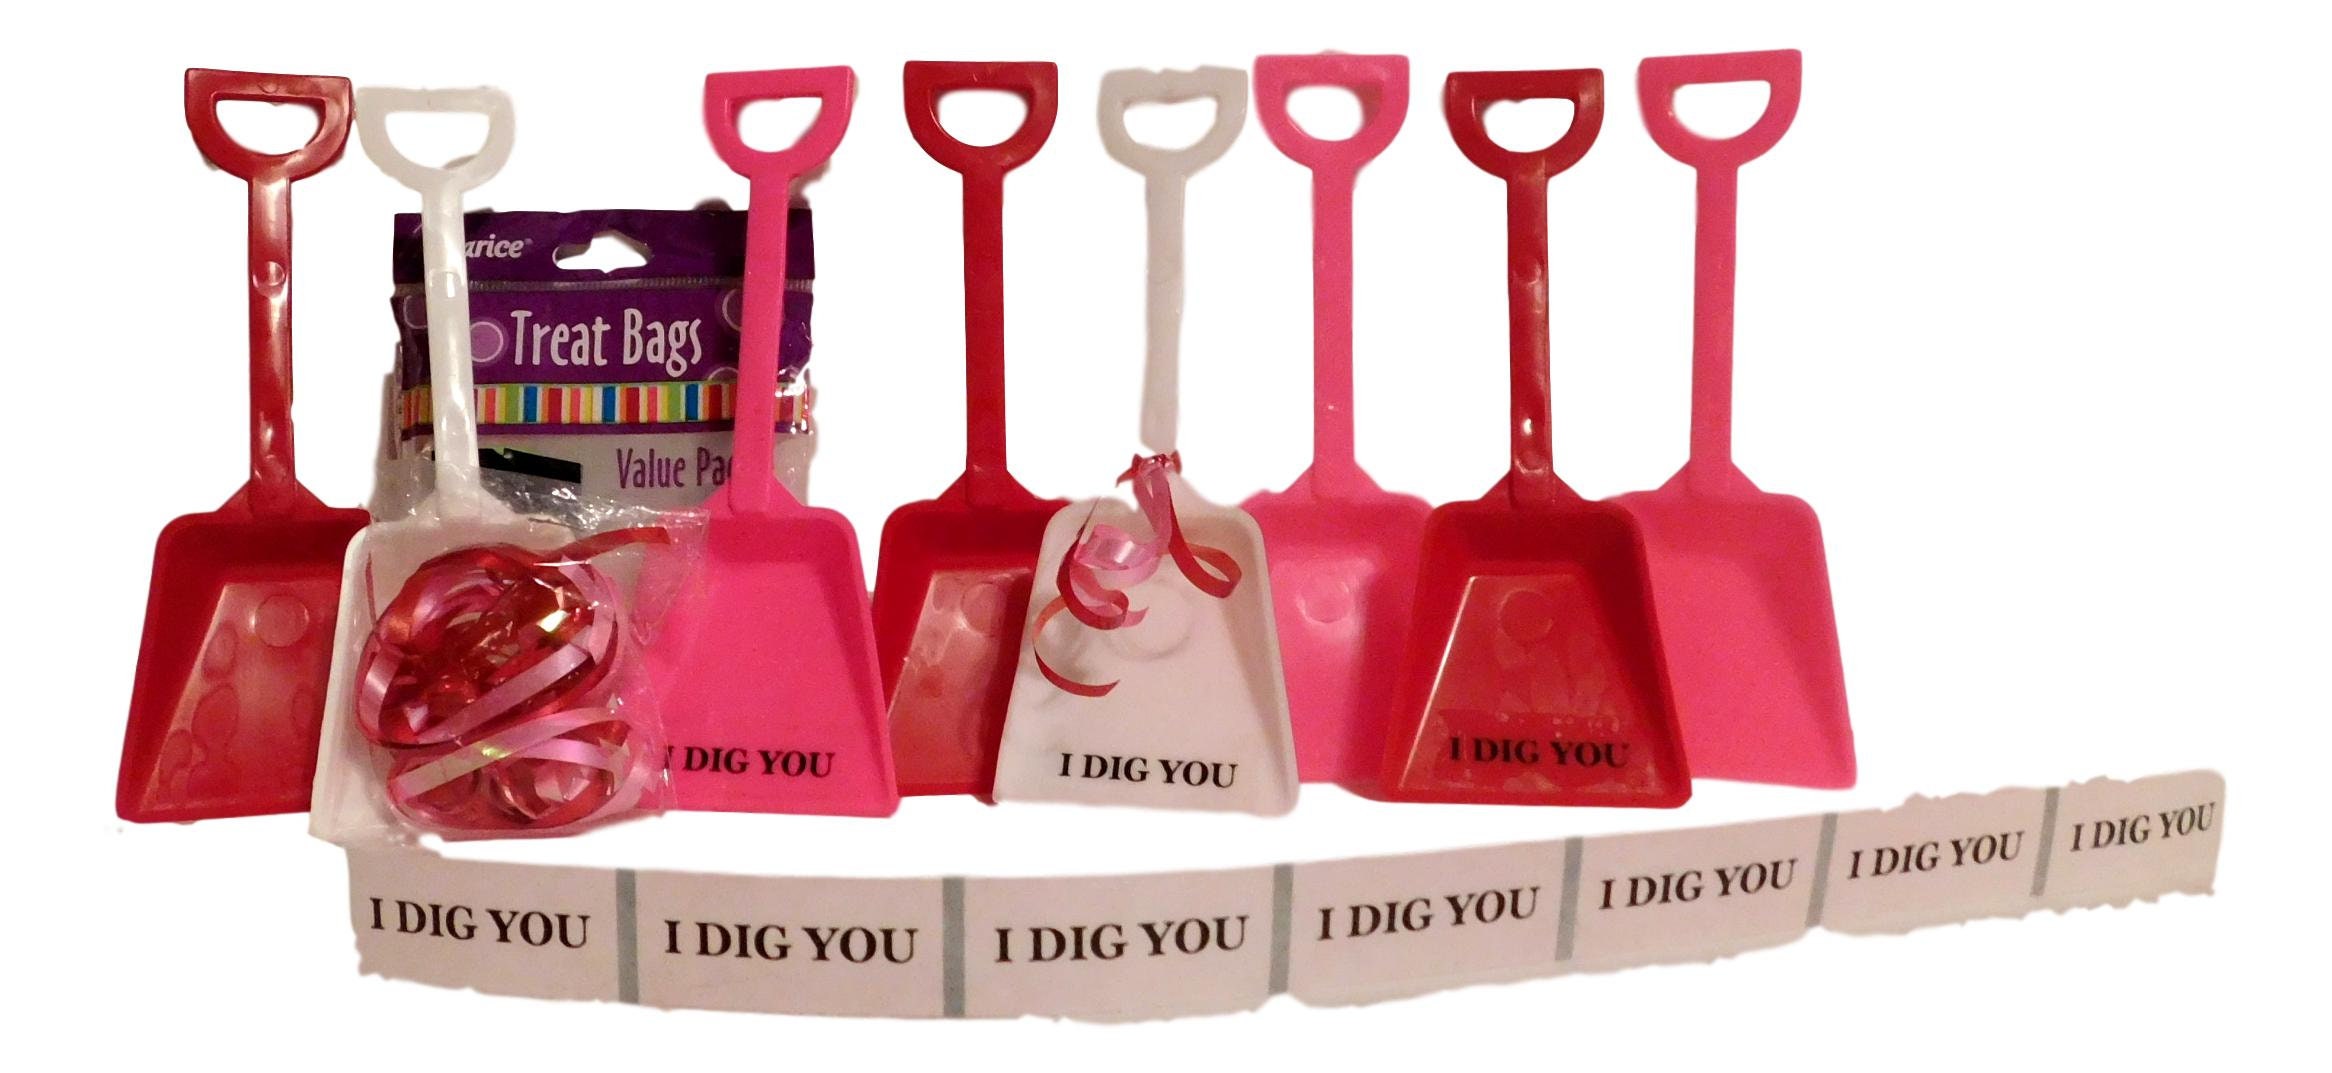 48 "I Dig You" Stickers  48 Green Toy Plastic Sand Shovels Mfg USA Lead Free* 